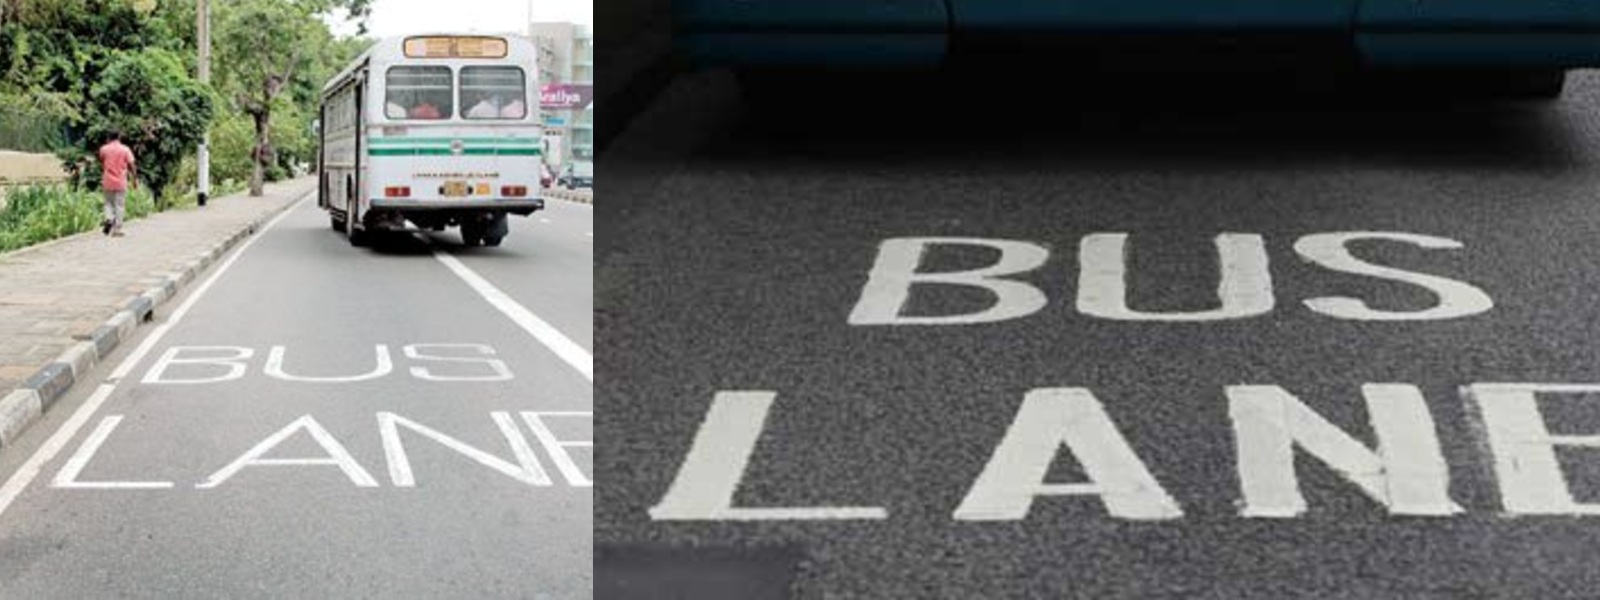 Bus Priority Lane Rule to come in to effect